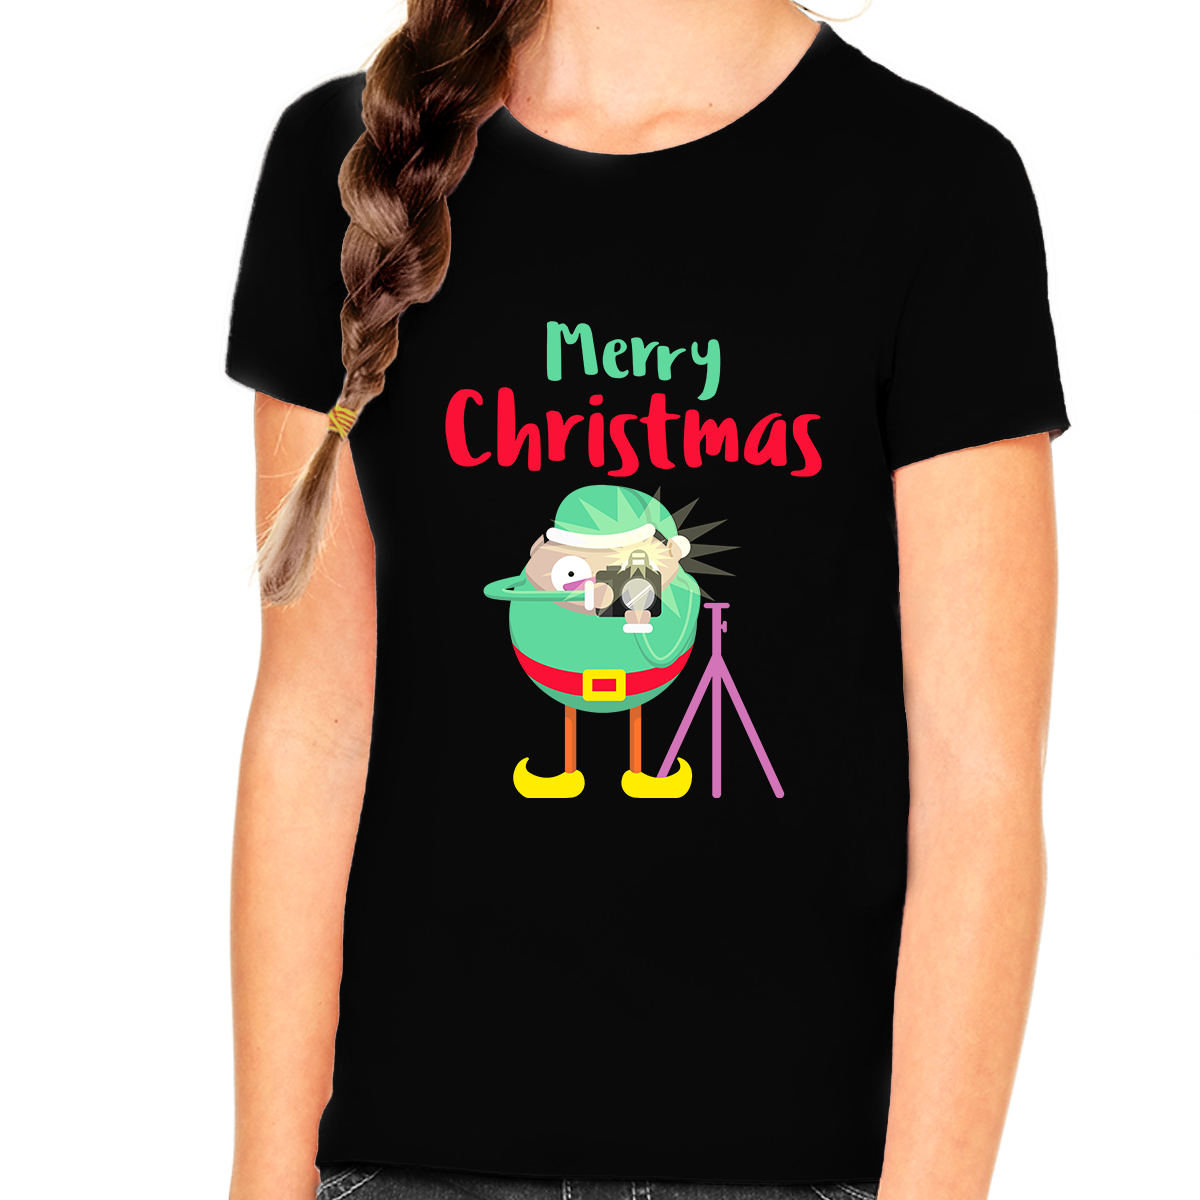 Funny Elf Christmas Gifts for Girls Funny Christmas Shirts for Girls Christmas T-Shirt Kids Christmas Shirt